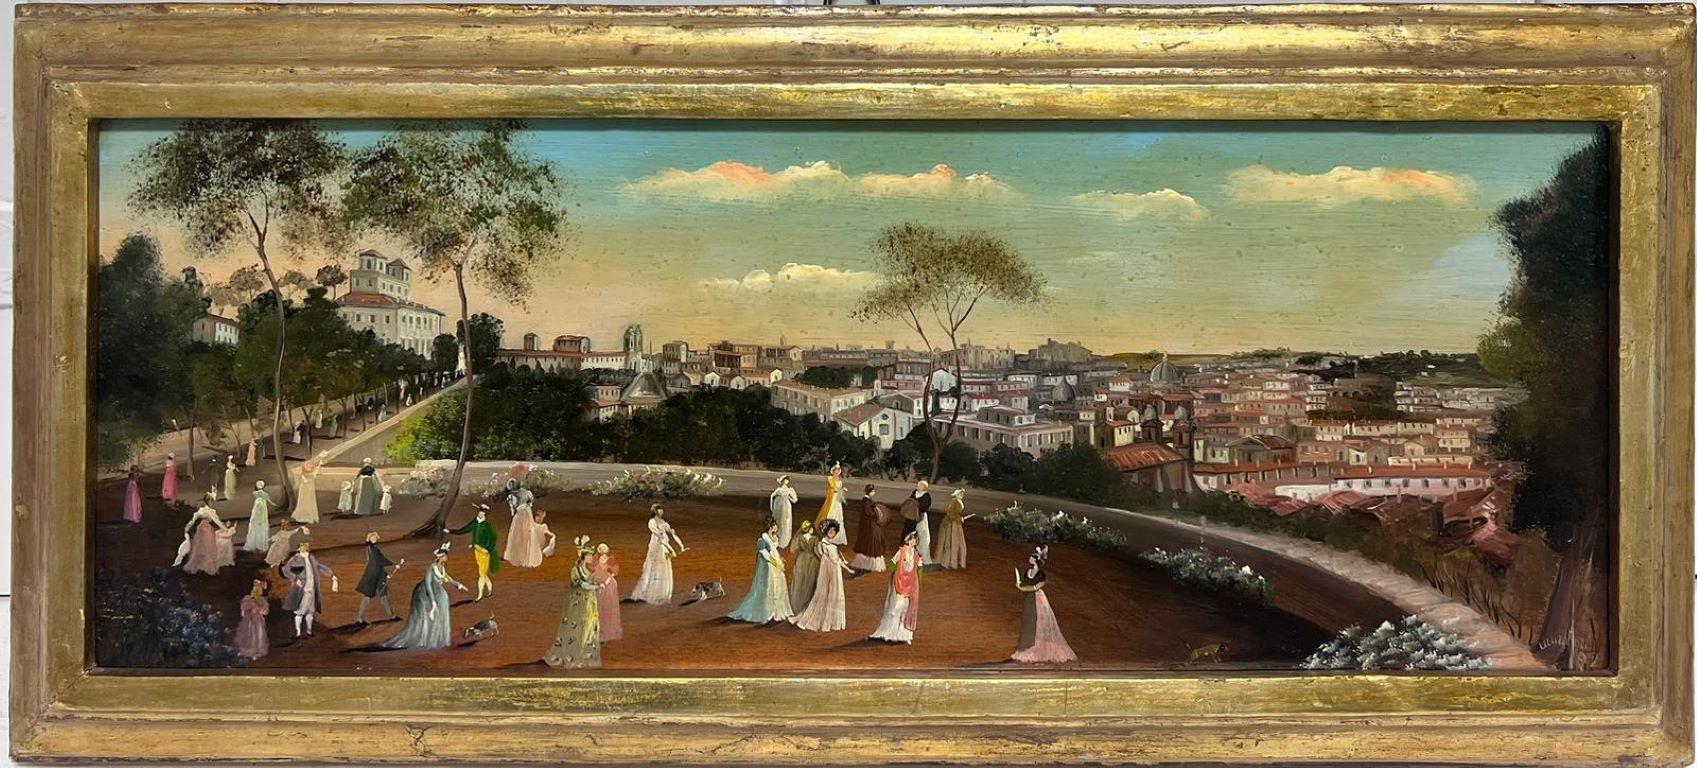 Elegant Figures Promenading in Park overlooking City of Florence Skyline, signed - Painting by Italian School